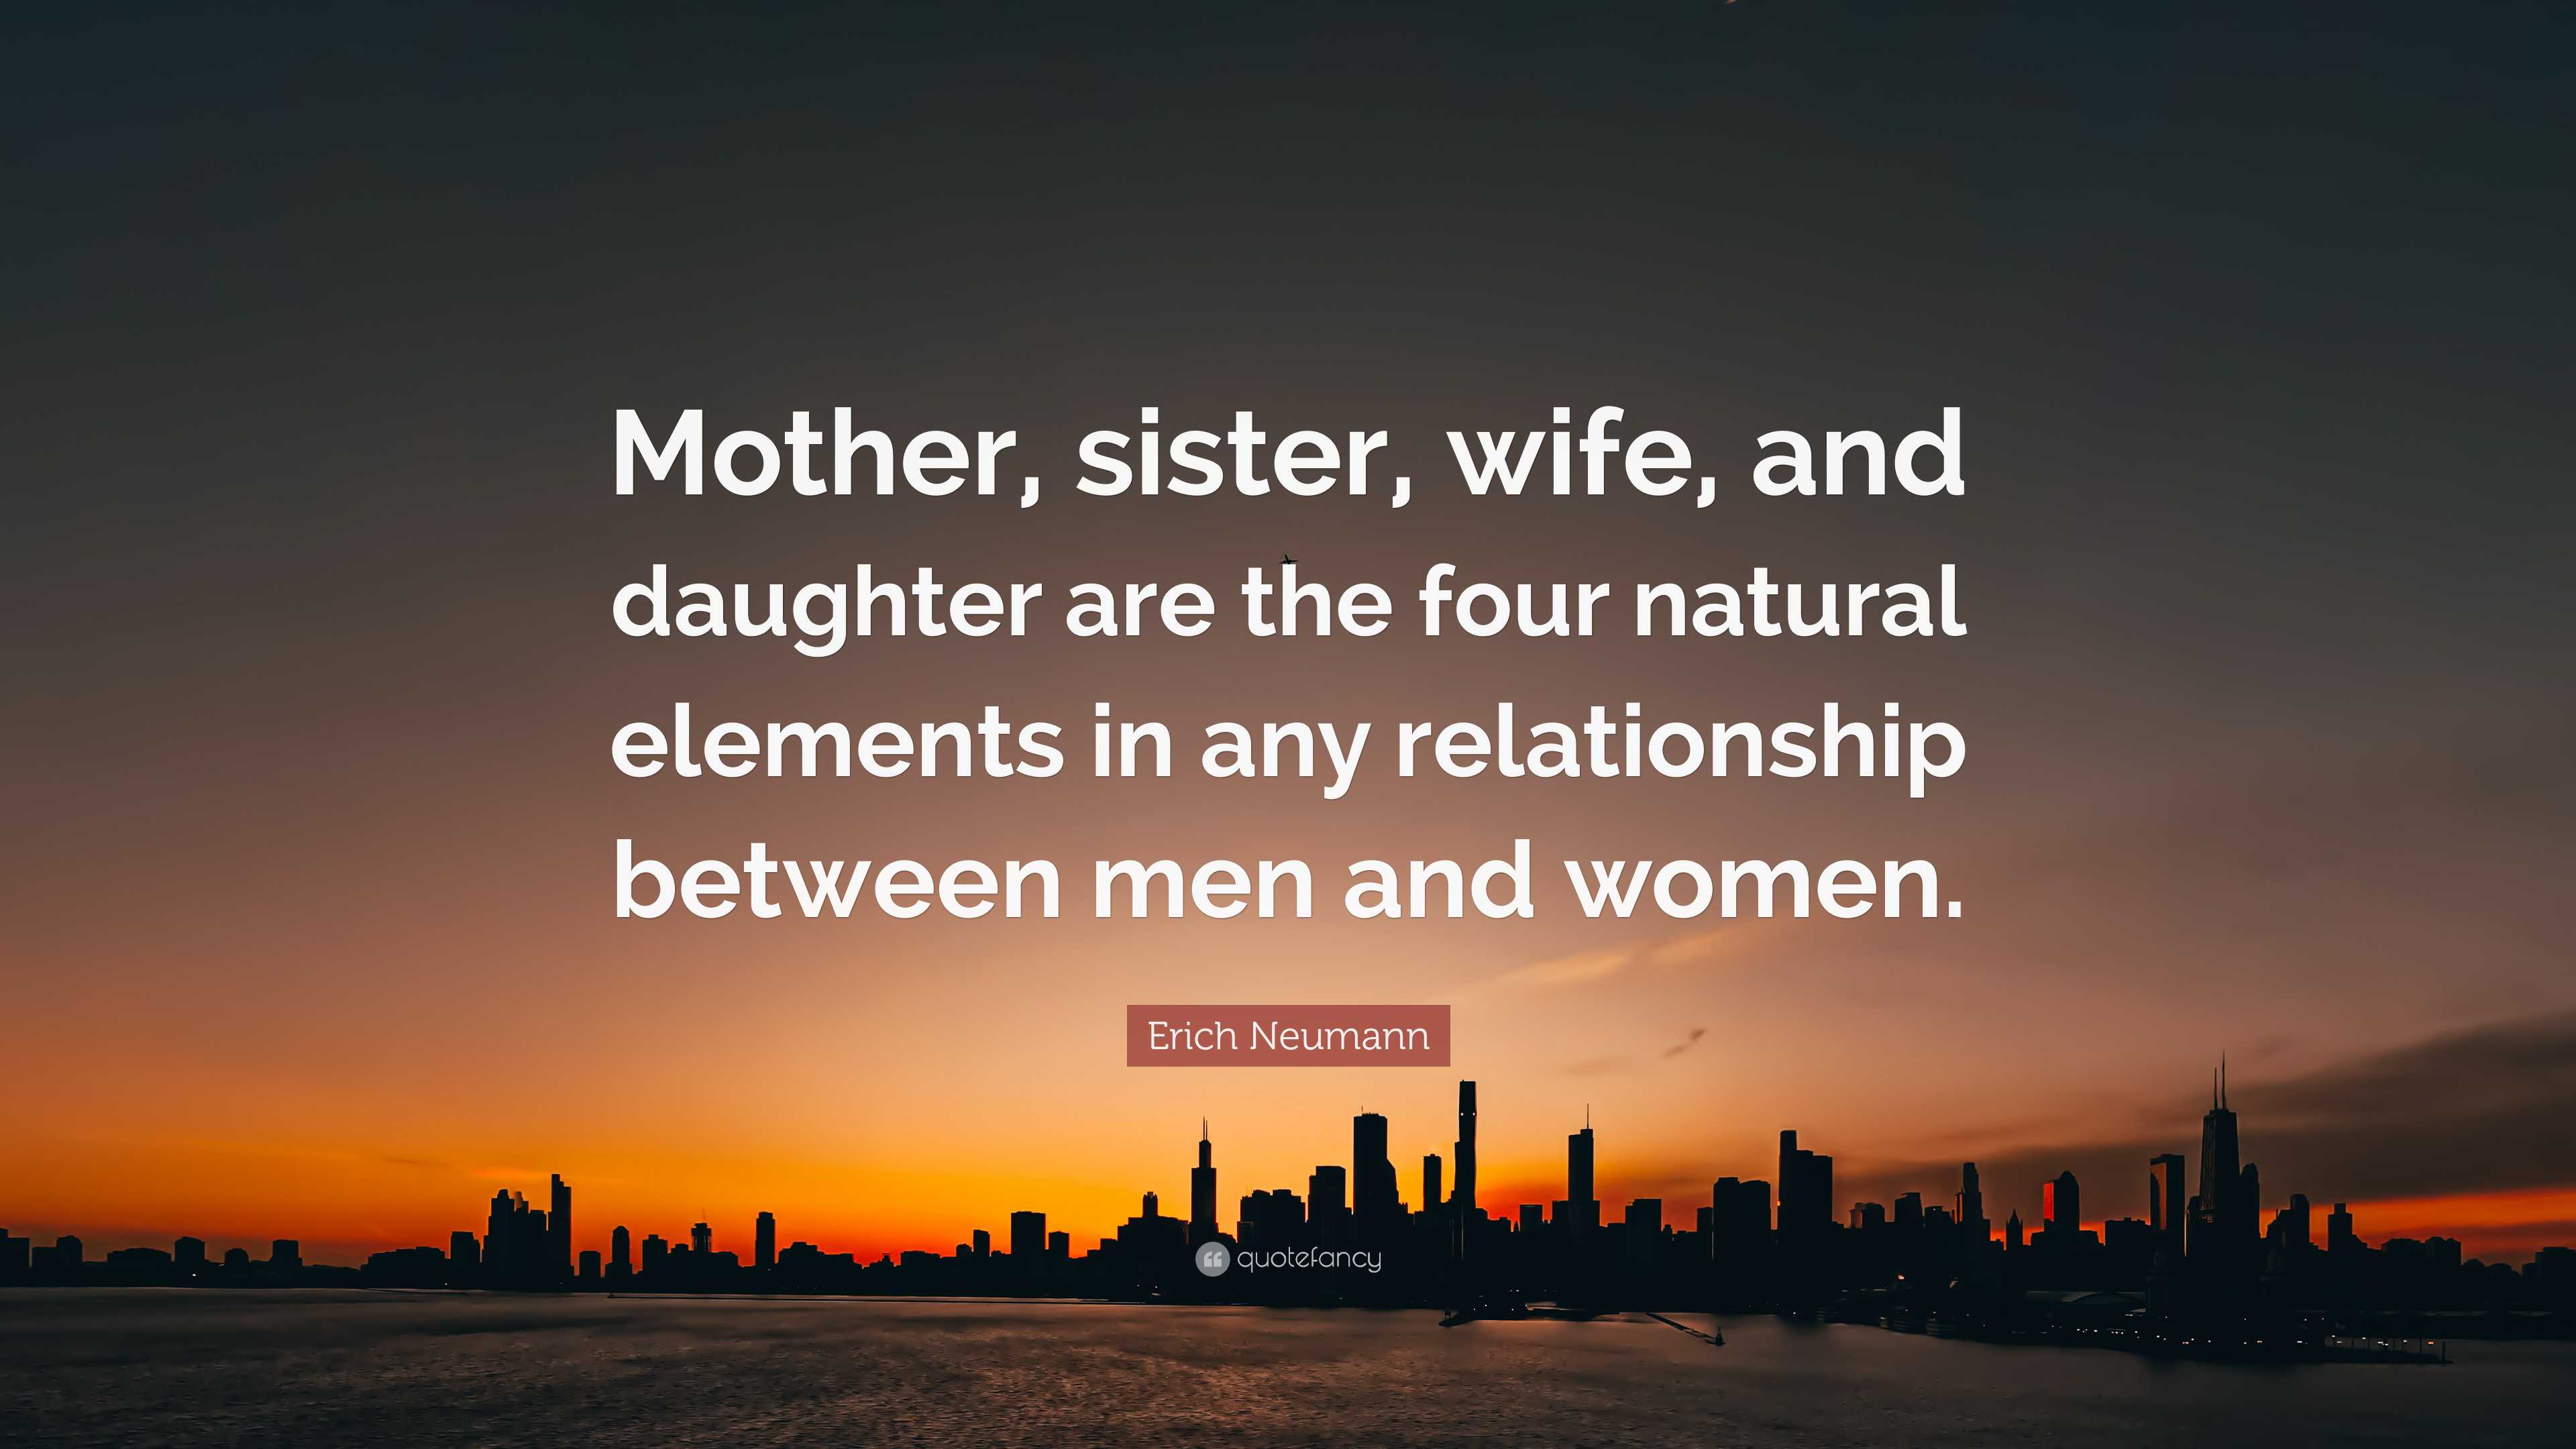 Erich Neumann Quote “Mother, sister, wife, and daughter are the four natural elements in any relationship